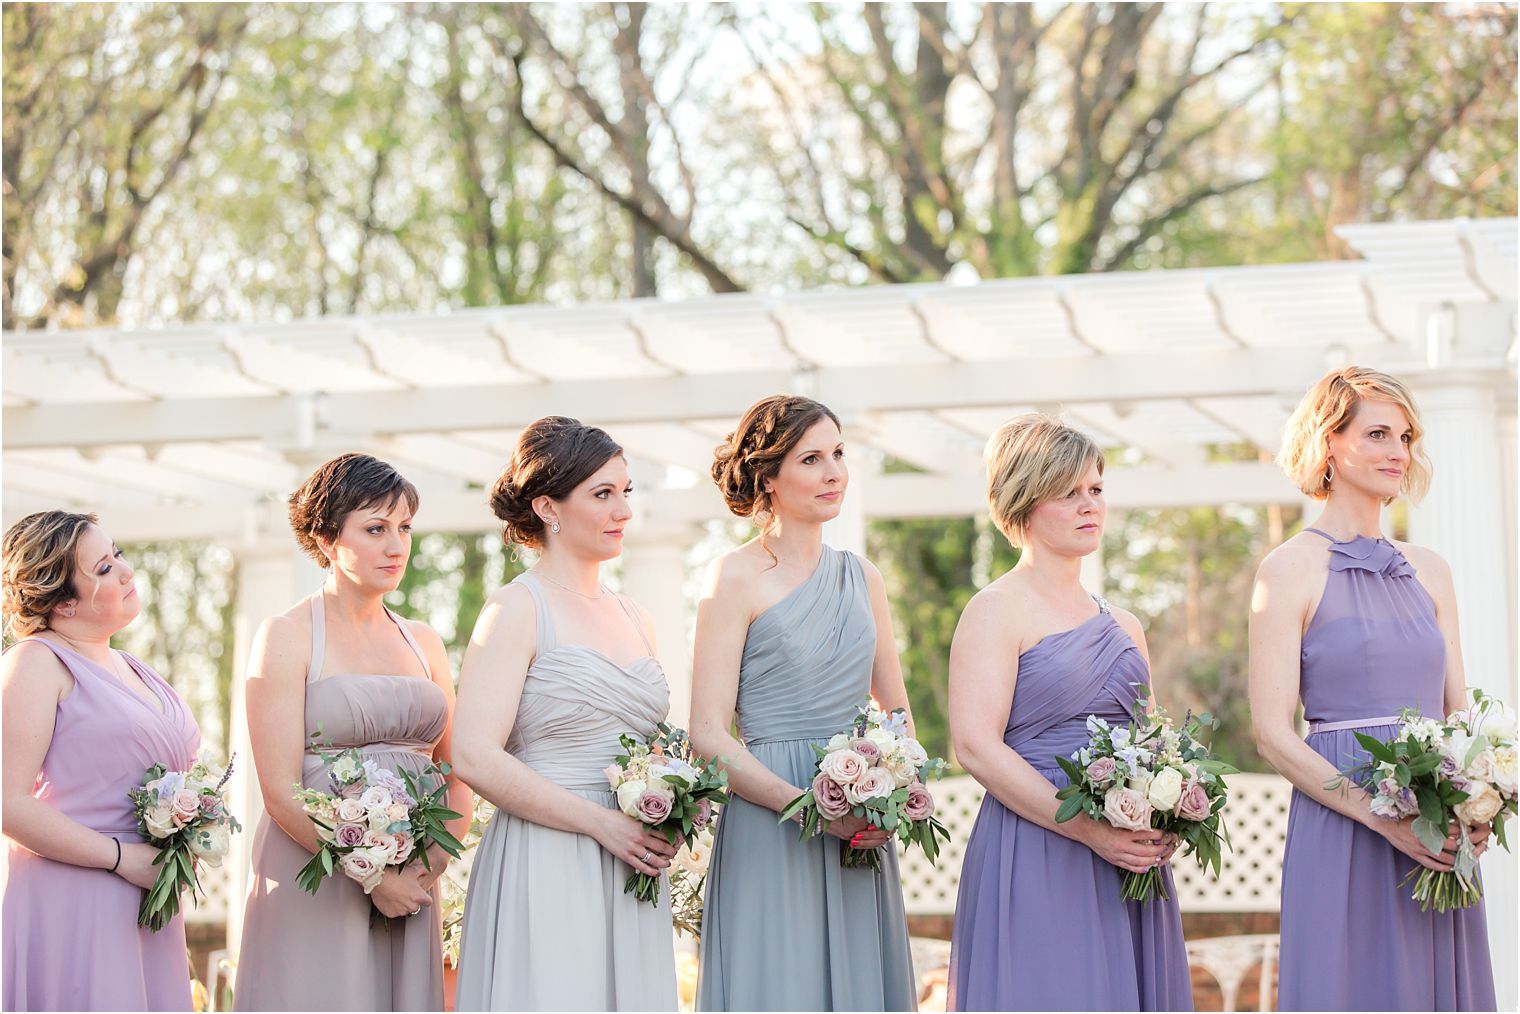 Bridesmaids in Alfred Angelo dresses